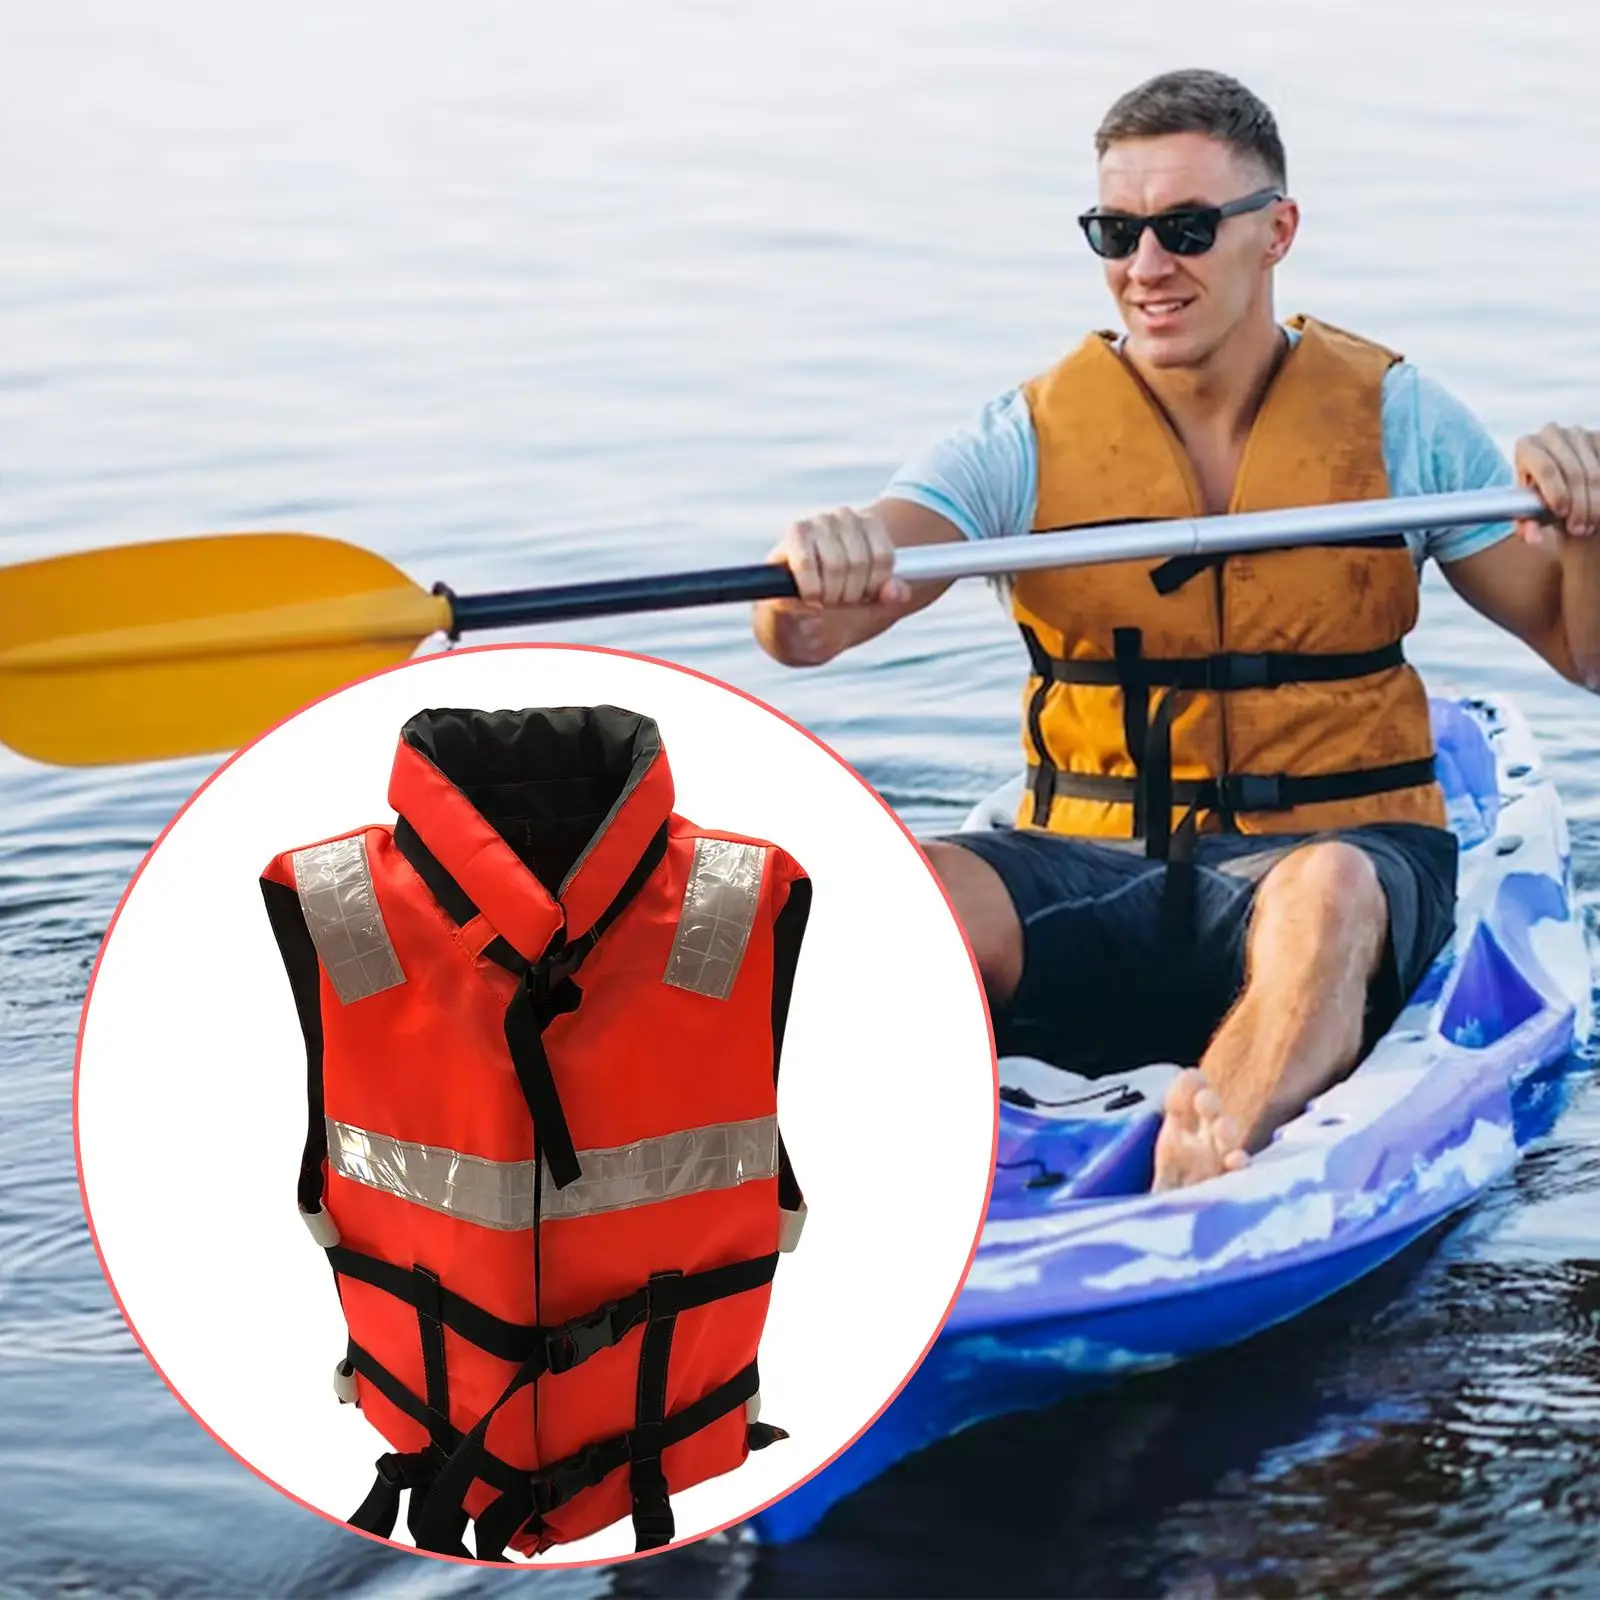 Orange Life Jackets Kayaking Paddle Board Buoyancy Aid for Surfing Diving